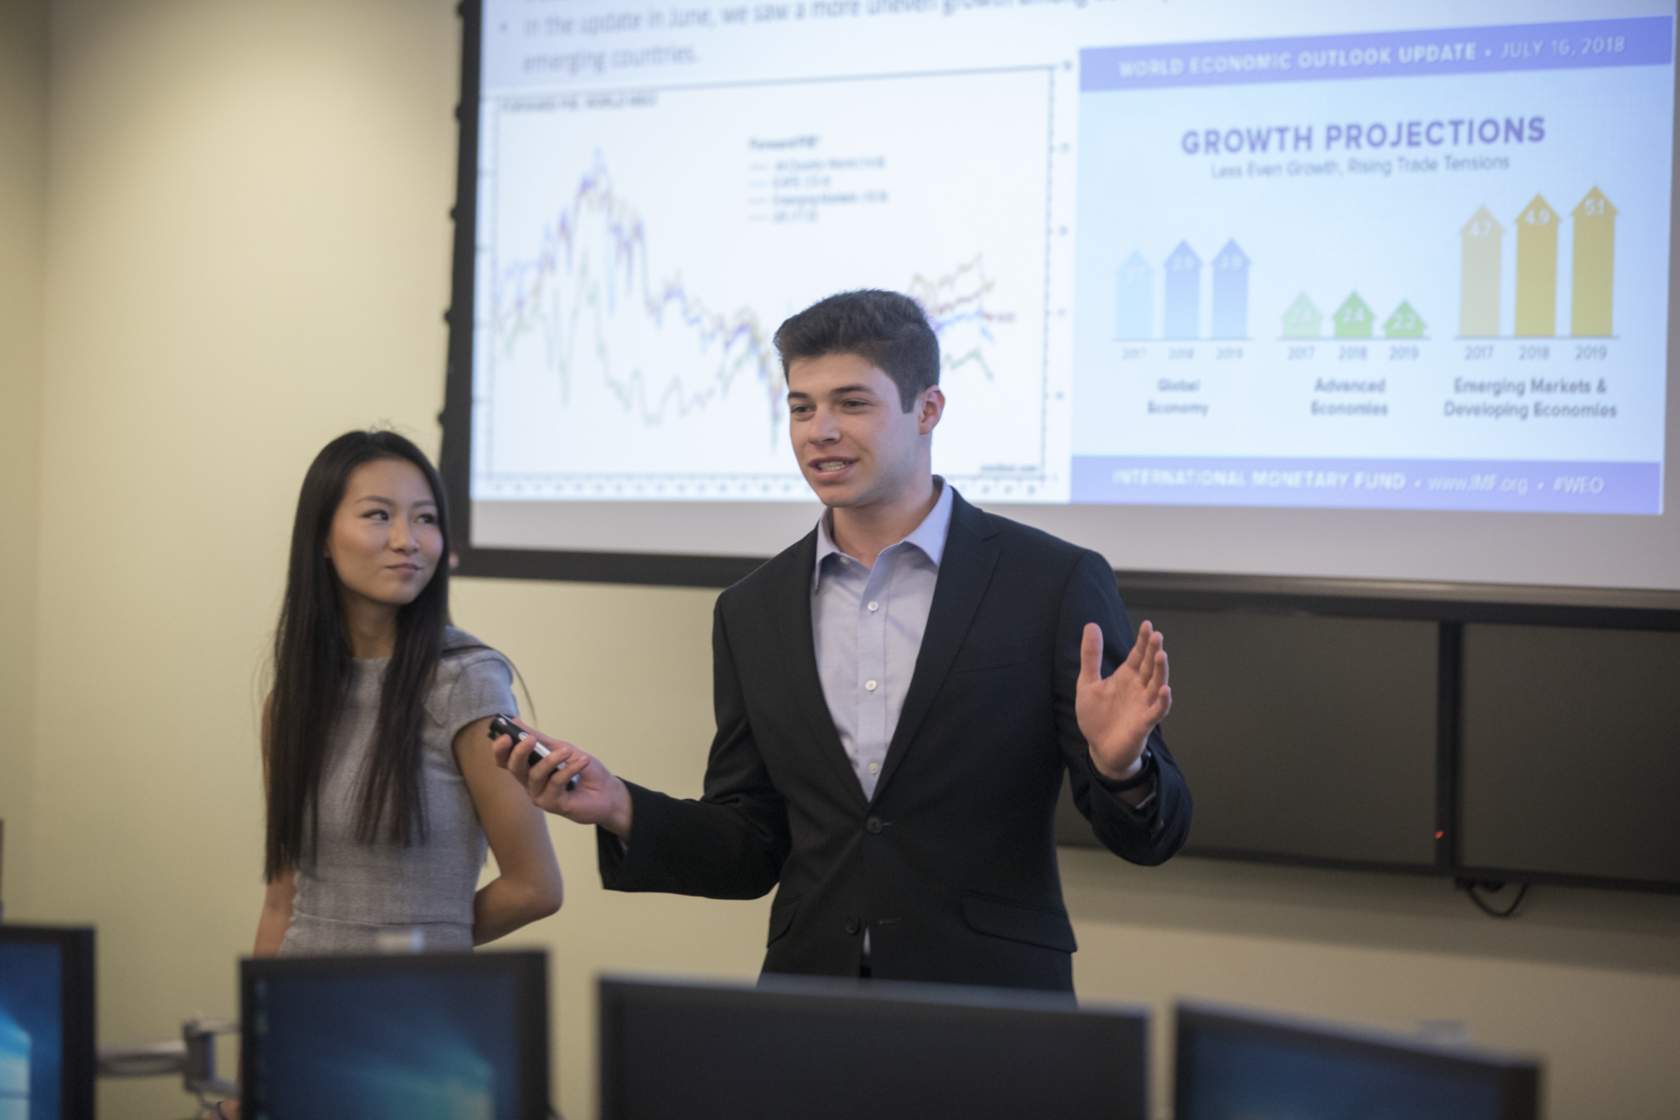 Two students presenting on growth projections